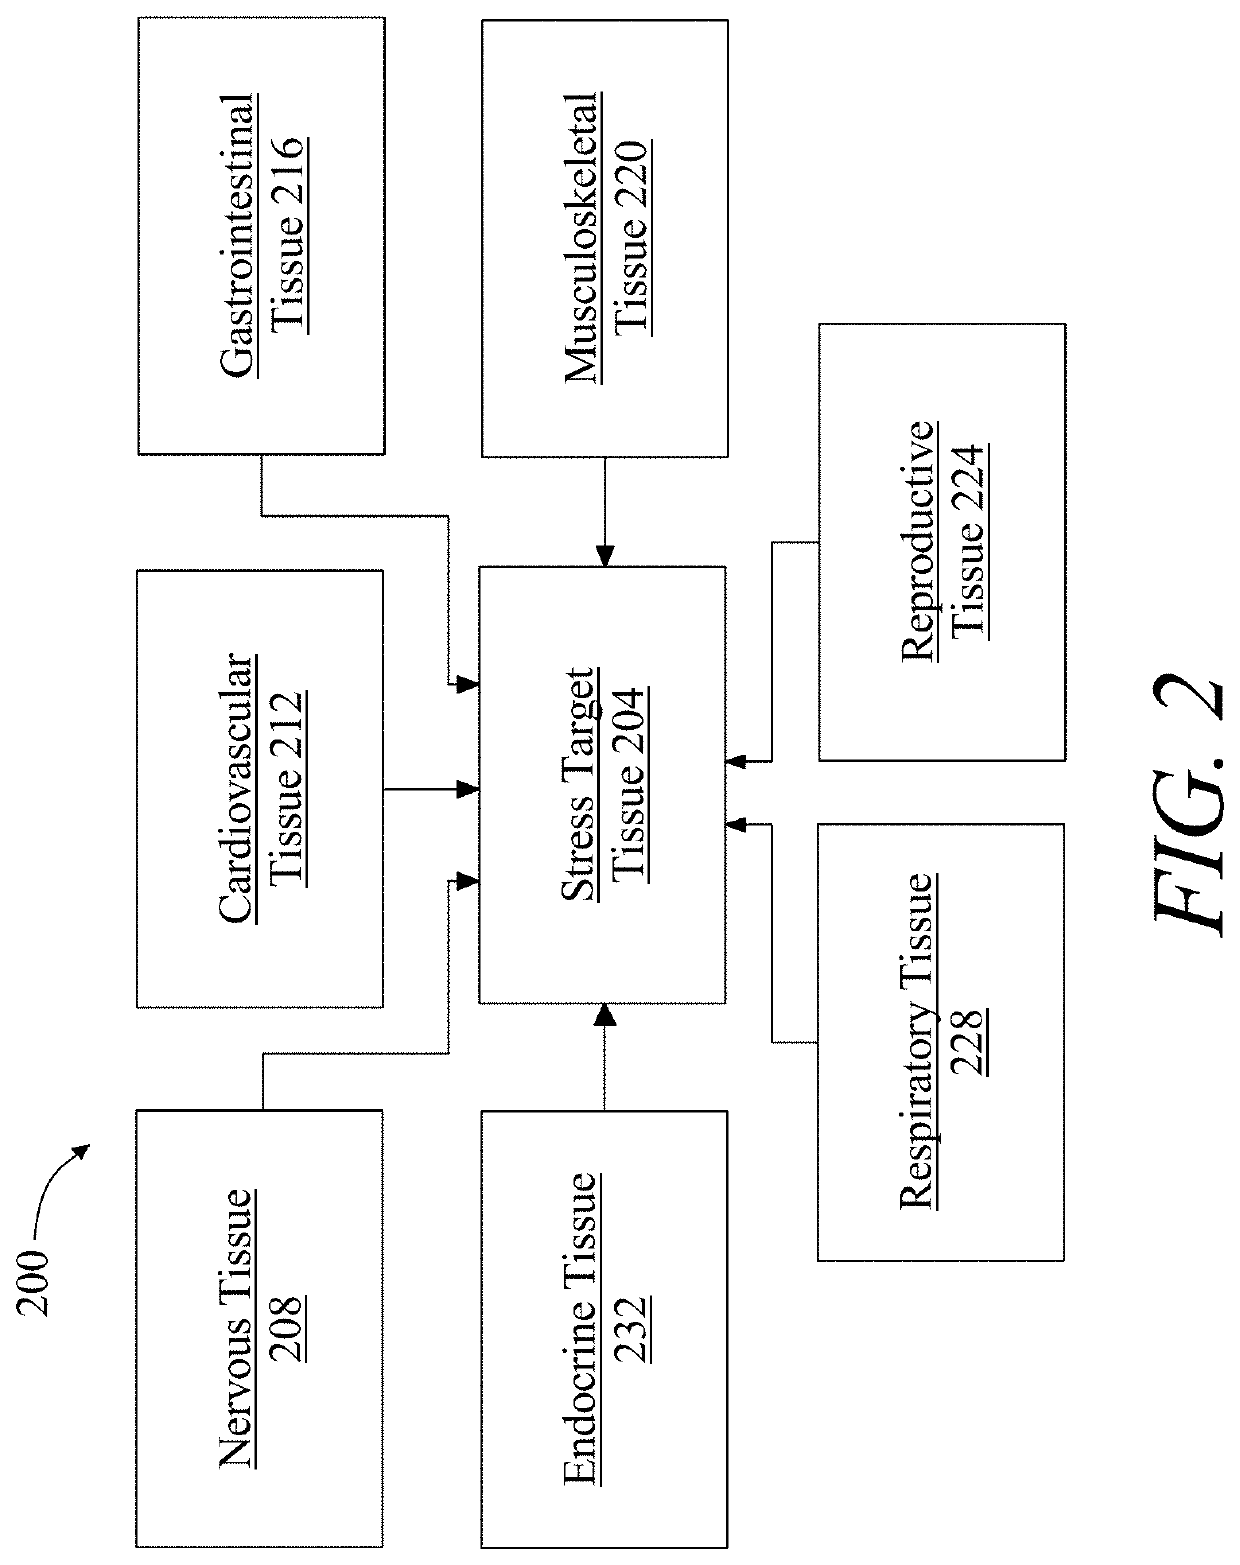 System and method for generating a stress disorder ration program